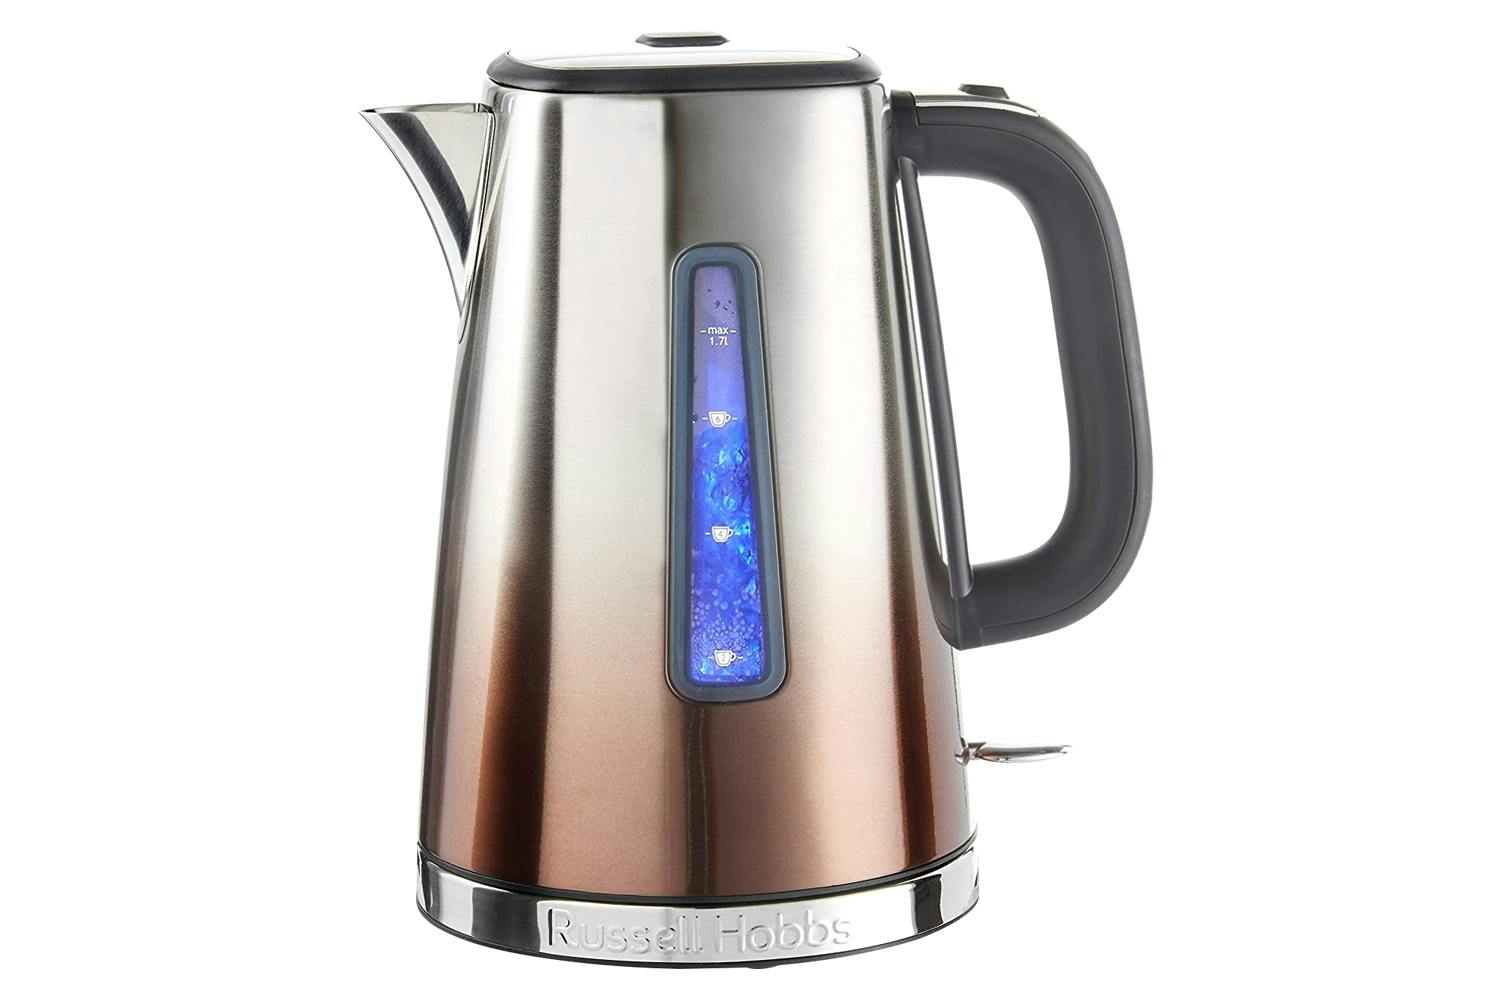 Russell Hobbs 1.7L Eclipse Kettle | 25113 | Copper Sunset